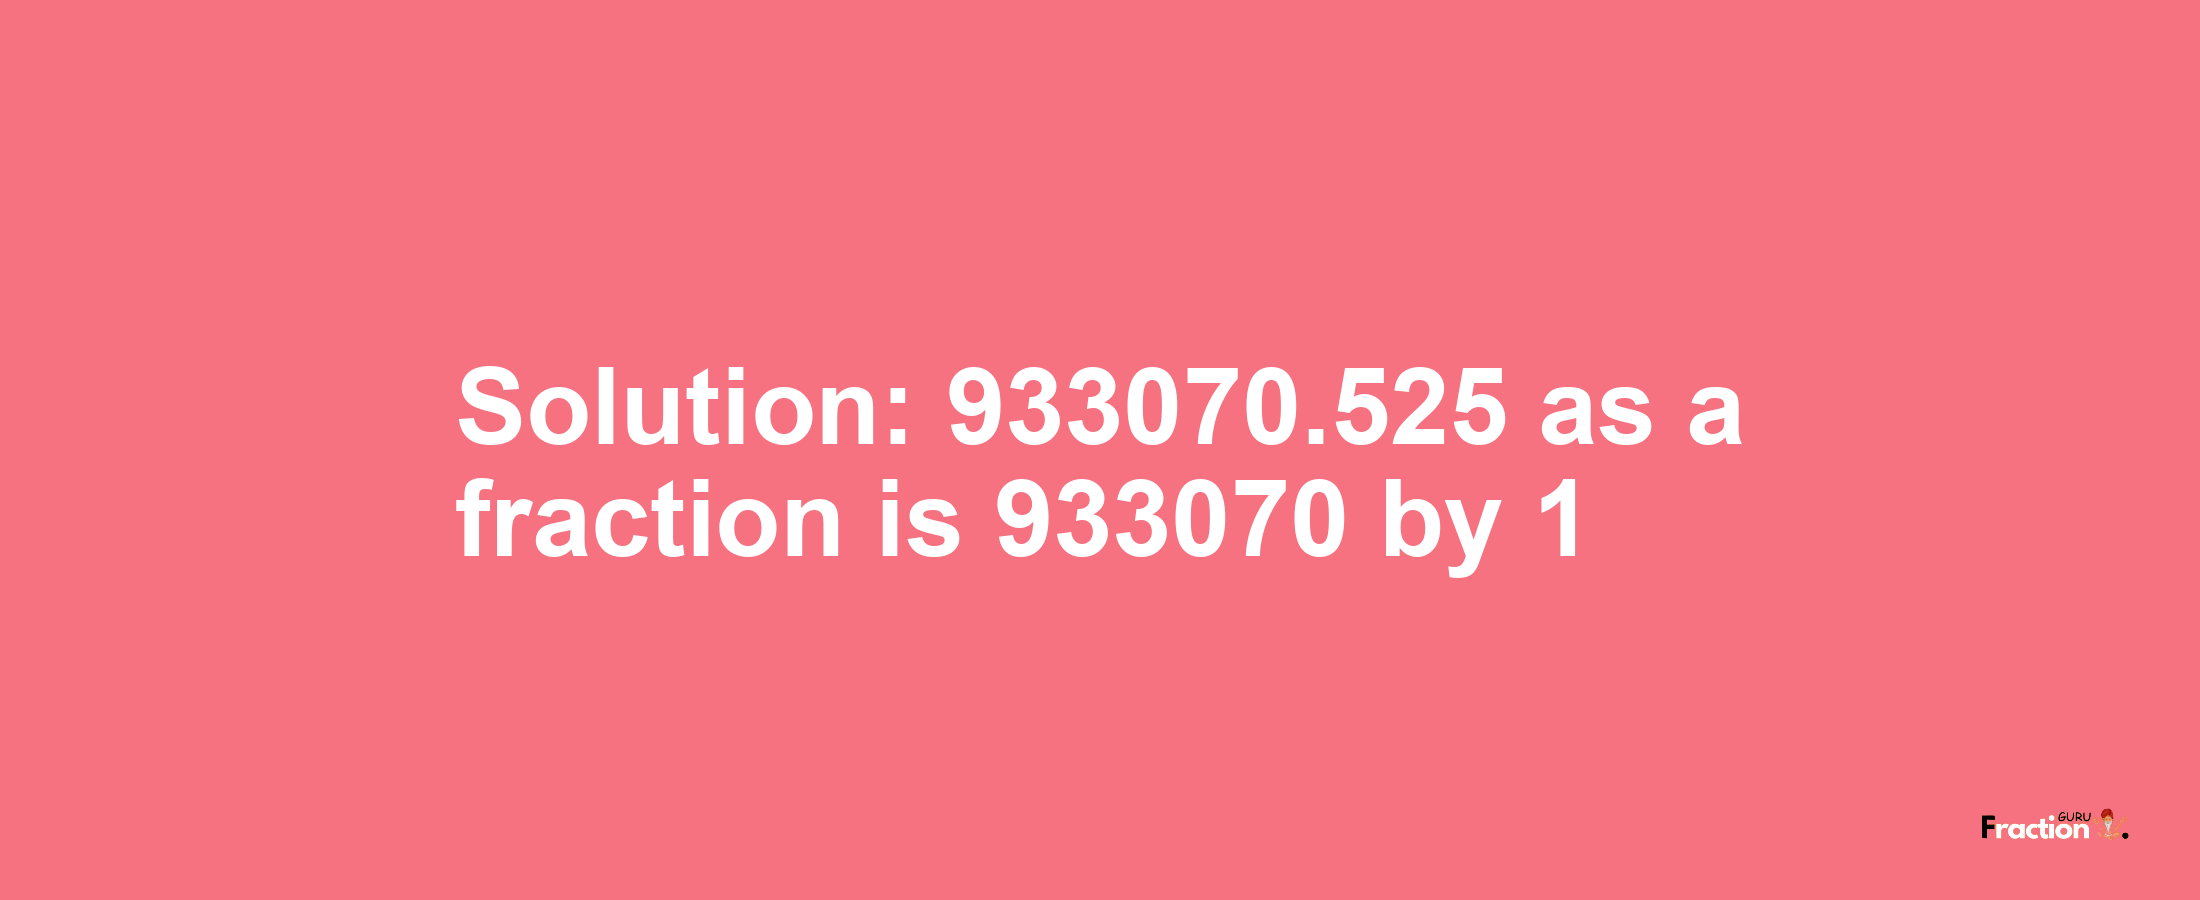 Solution:933070.525 as a fraction is 933070/1